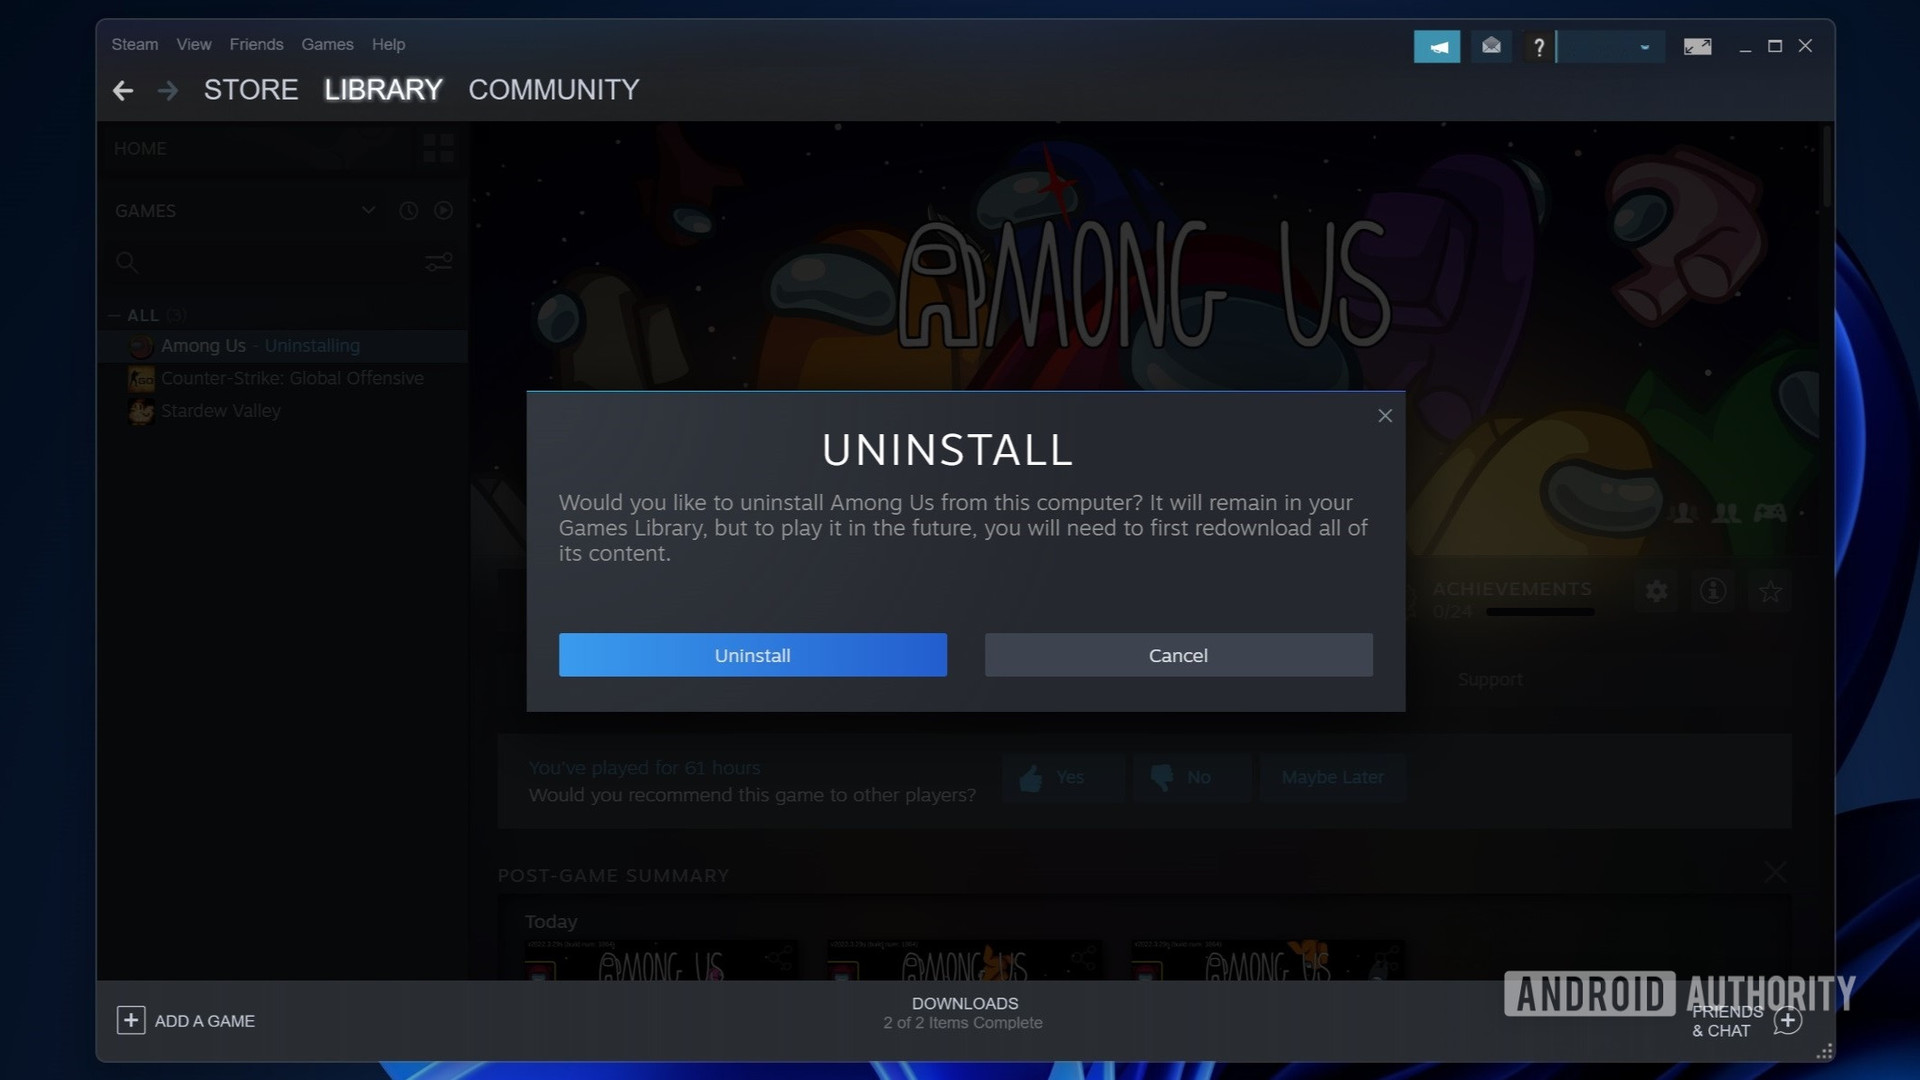 Steam uninstall game confirmation